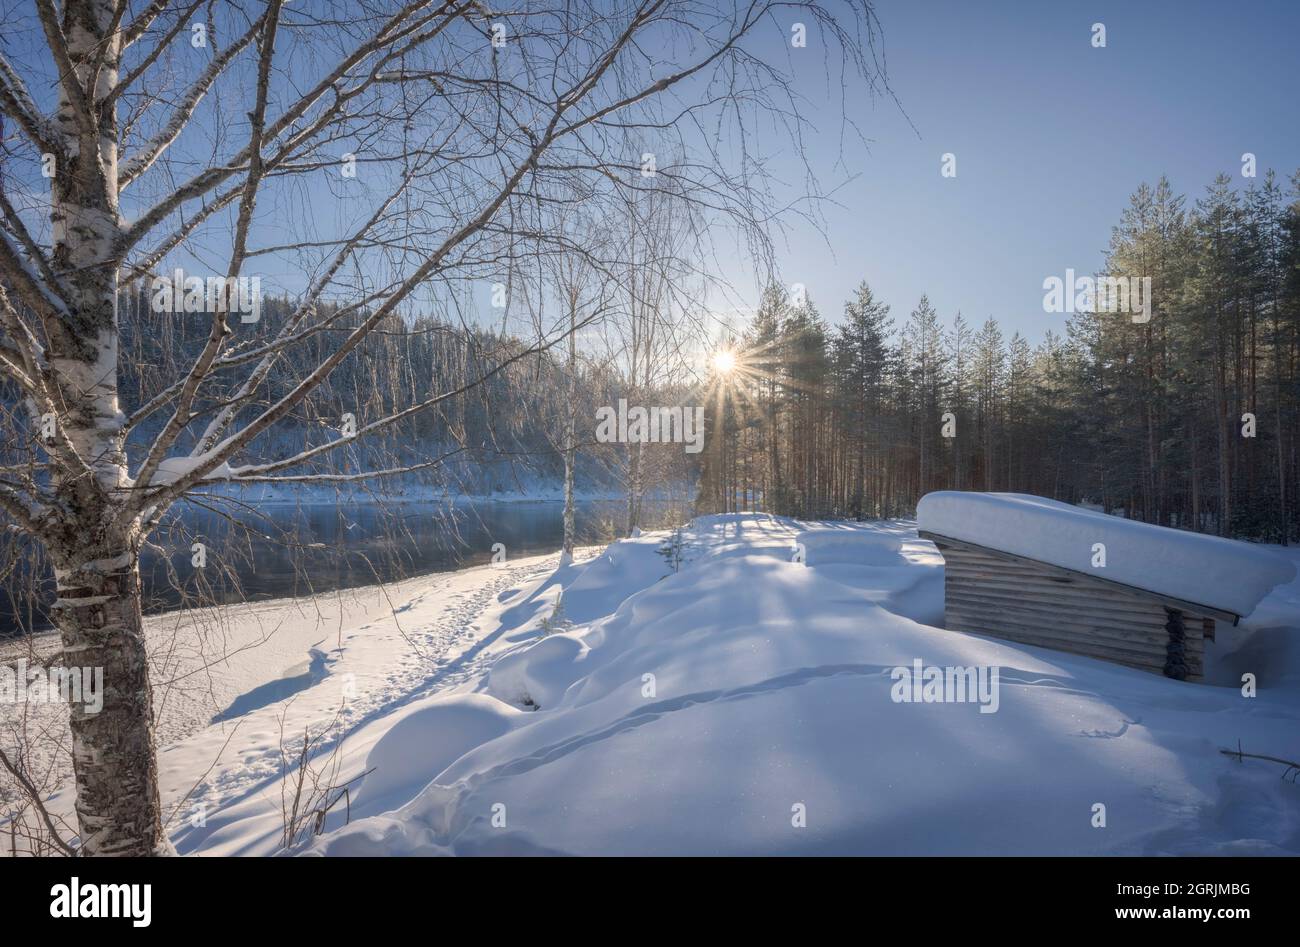 swedish winter landscape with a picnic place Stock Photo